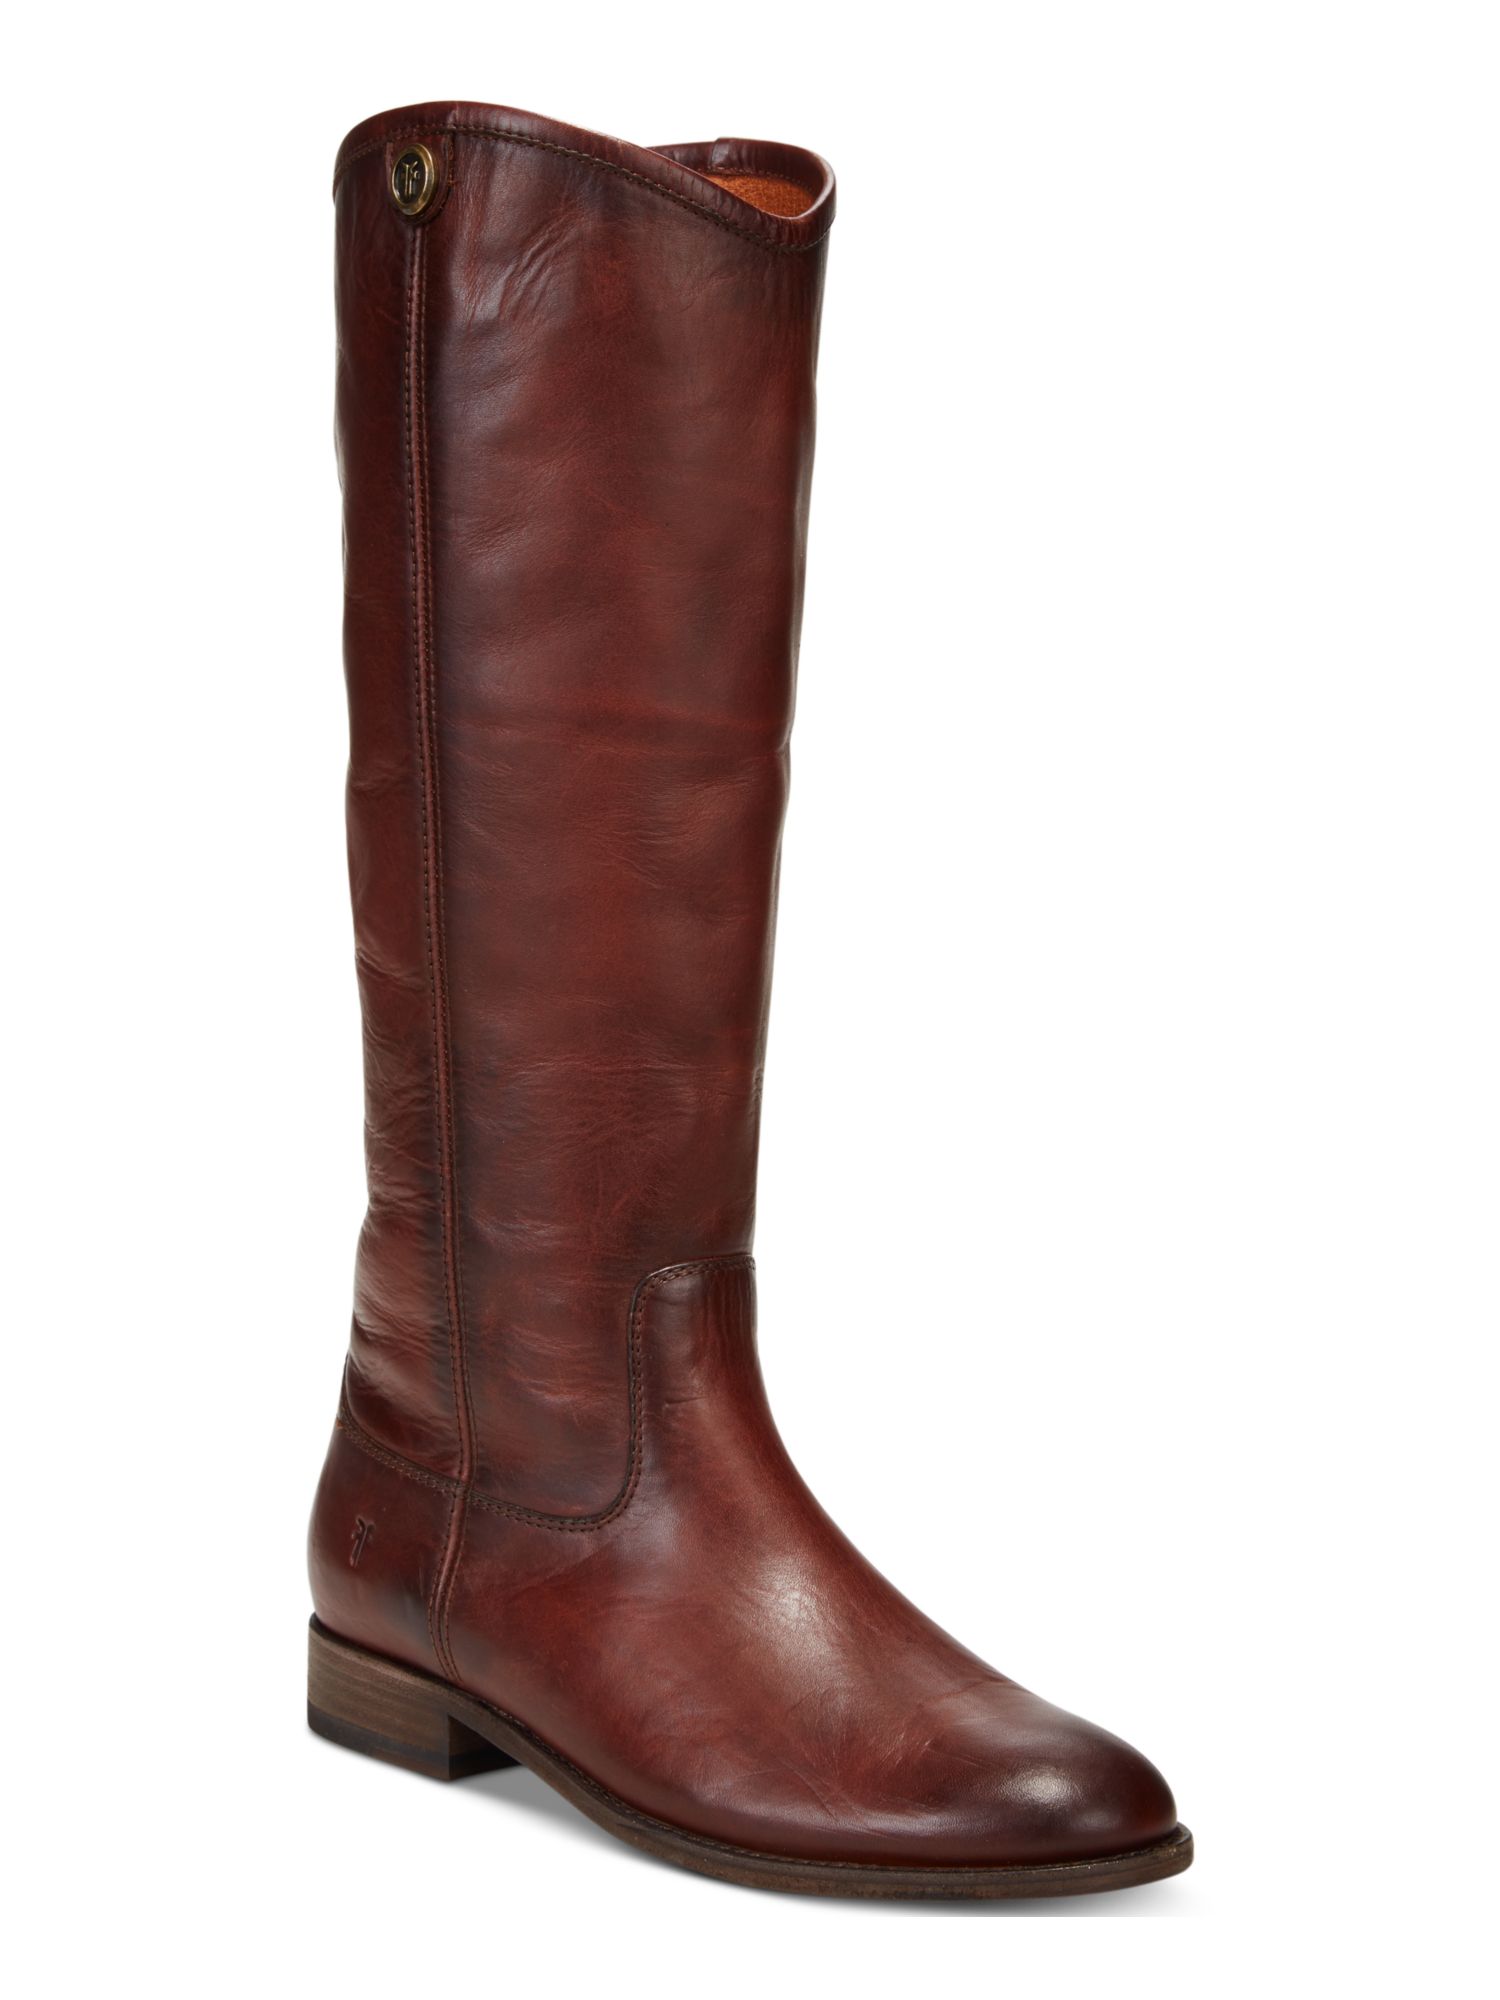 FRYE Womens Cognac Brown Button At Sides Tabs Button 2 Leather Riding Boot 5.5 B